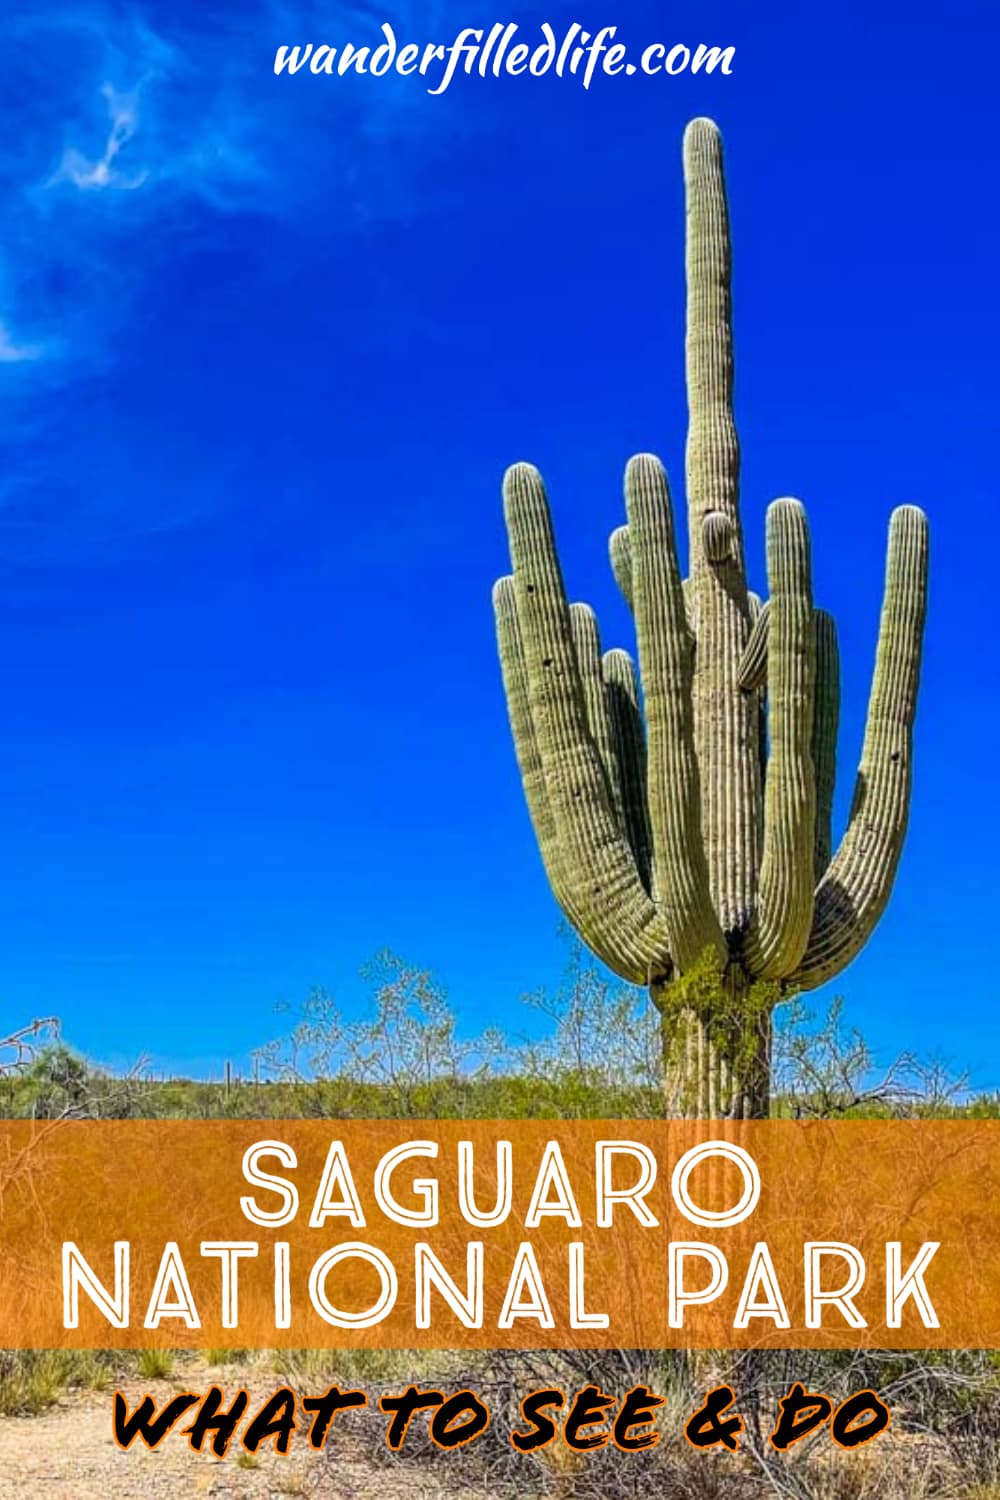 Even in just one day, there are several things to do at Saguaro National Park that allow you to see and learn about the iconic saguaro cactus.